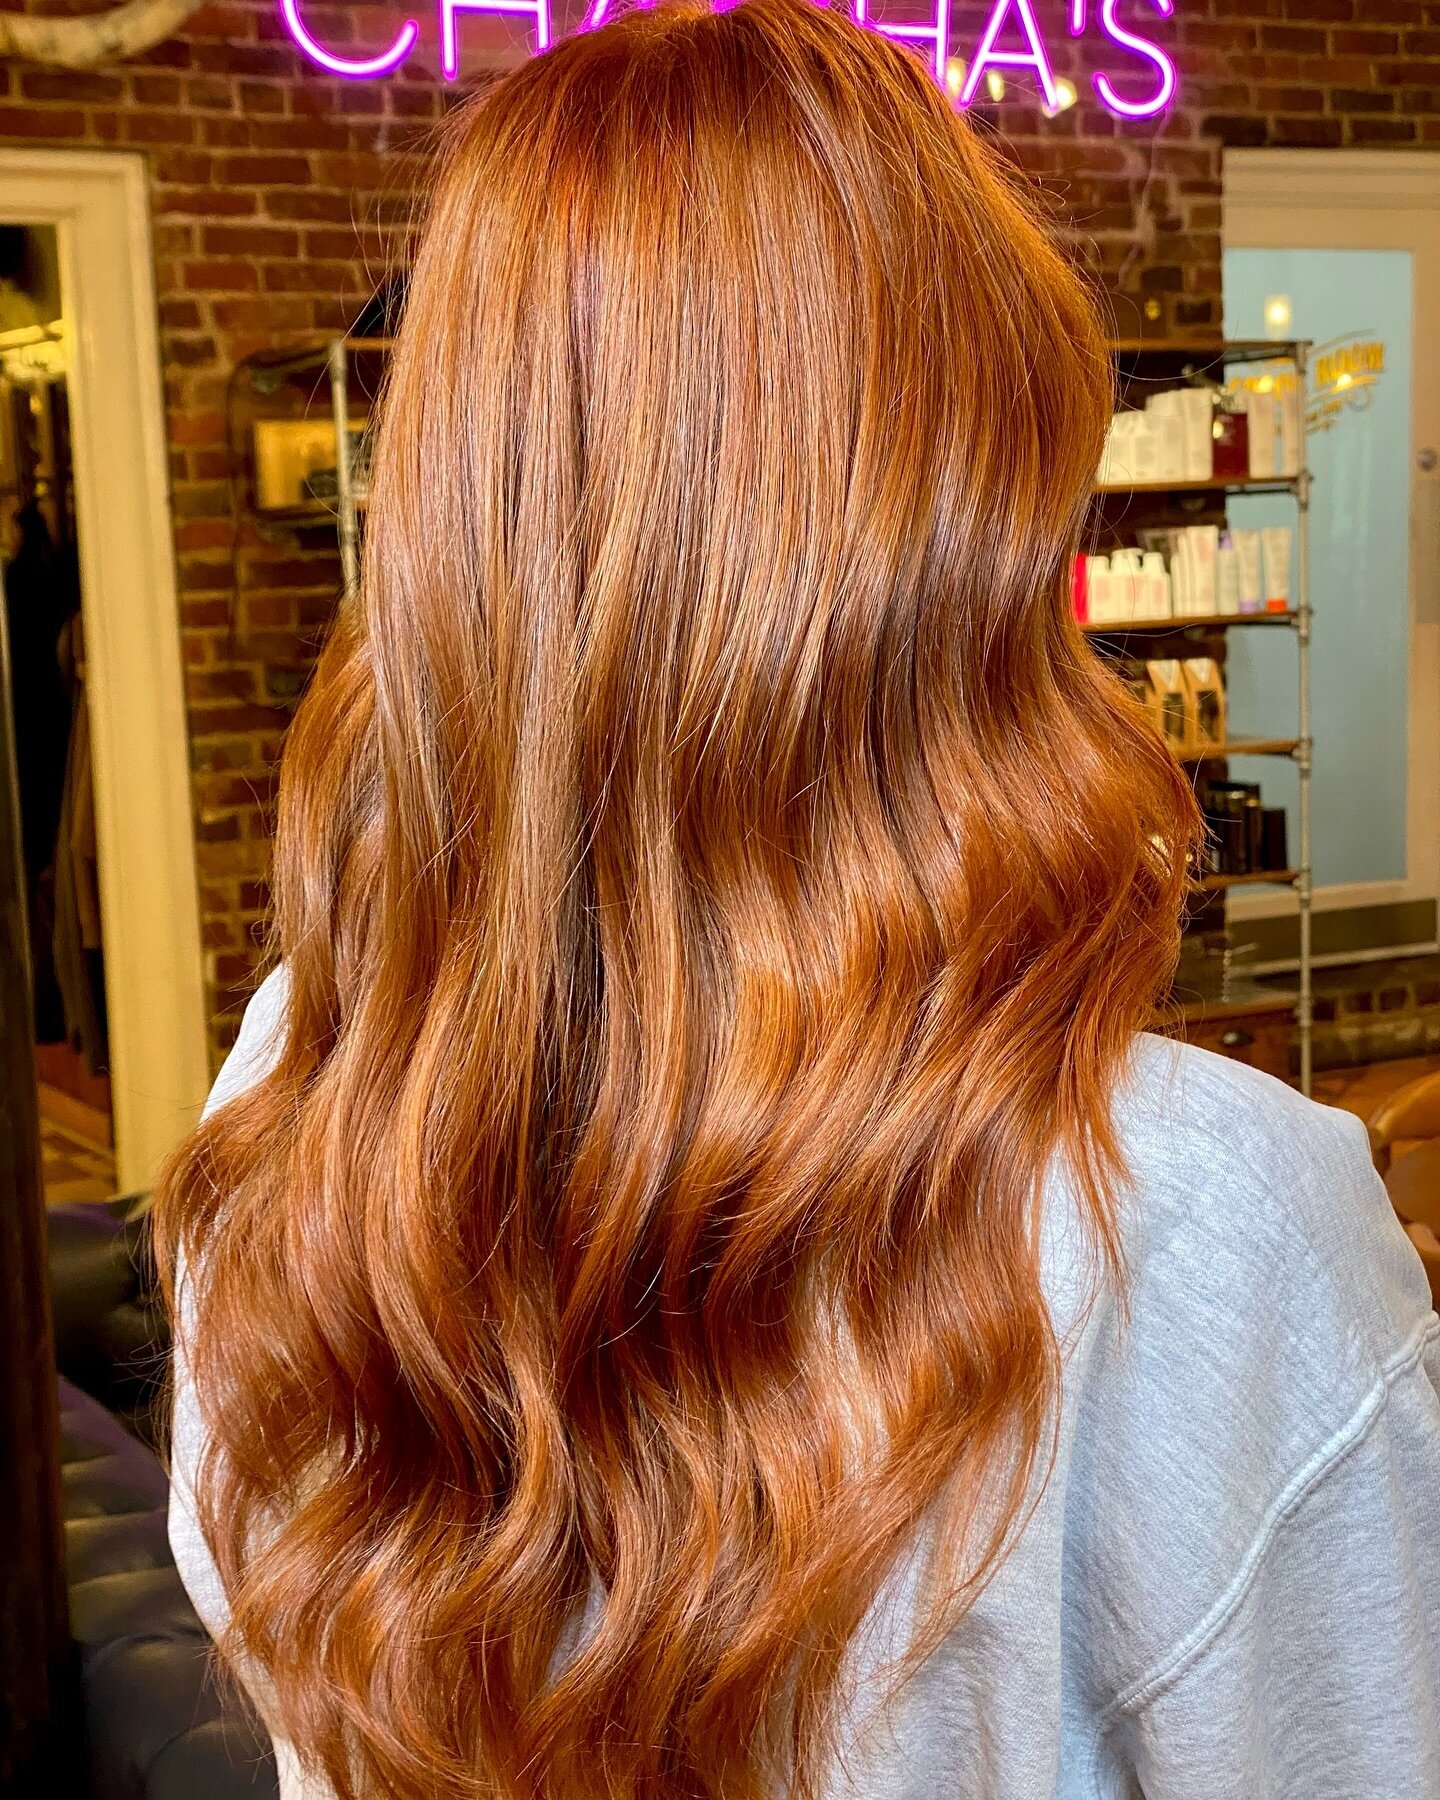 My client came in with virgin hair and asked for a natural ginger. I think I delivered, what do you think??

#sharethelex #kentuckykicksass #kentuckyhairstylist #kentuckyhair #kentuckyproud #wellahair #evo #davines #redhair #redhead #cincinnati #lexi